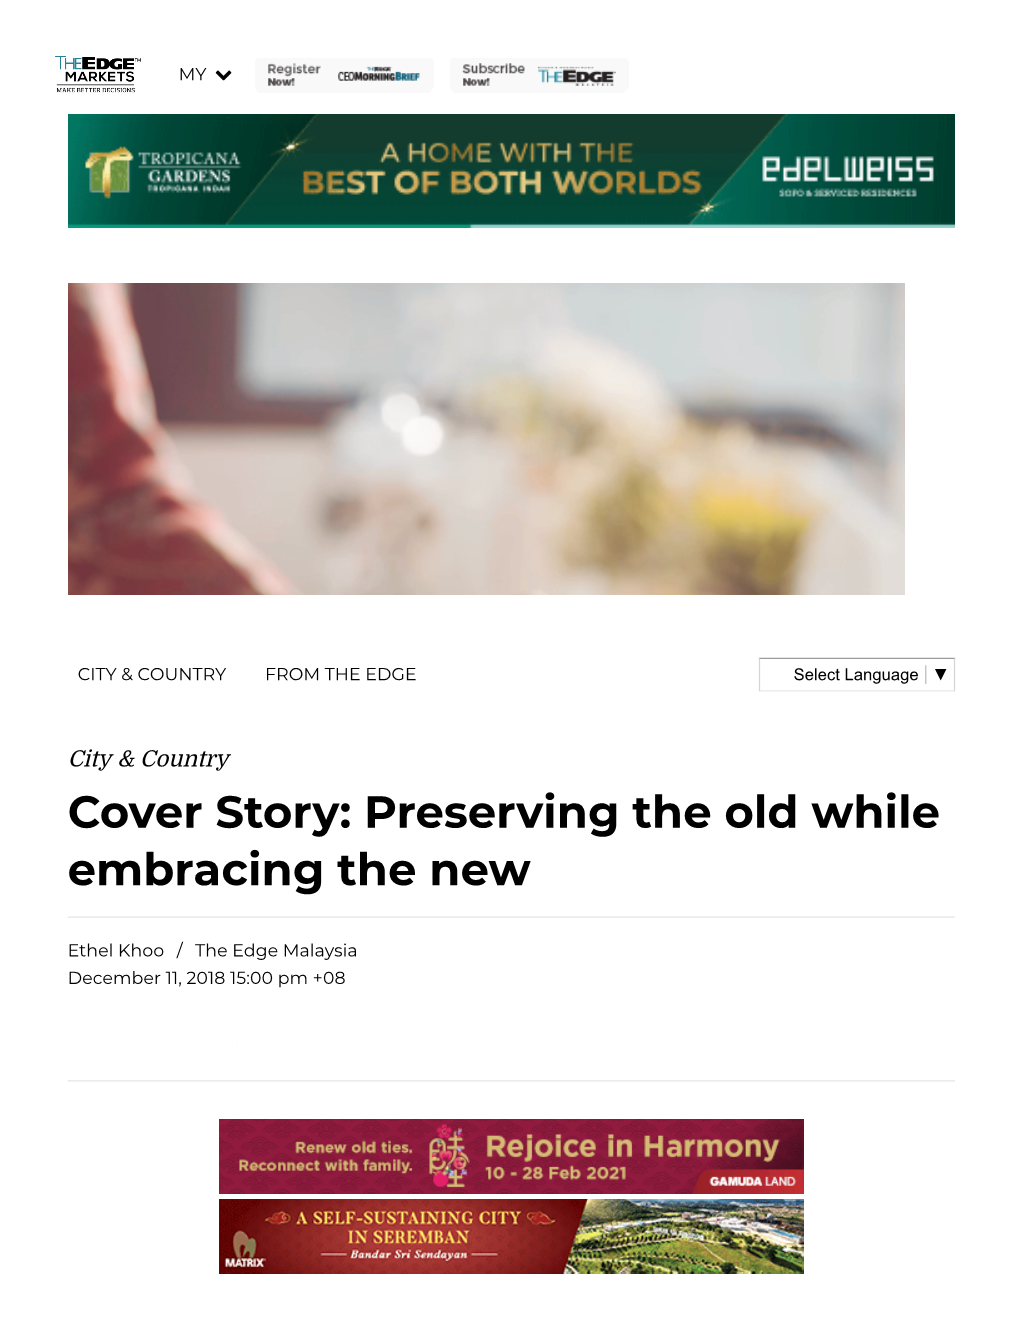 Cover Story: Preserving the Old While Embracing the New